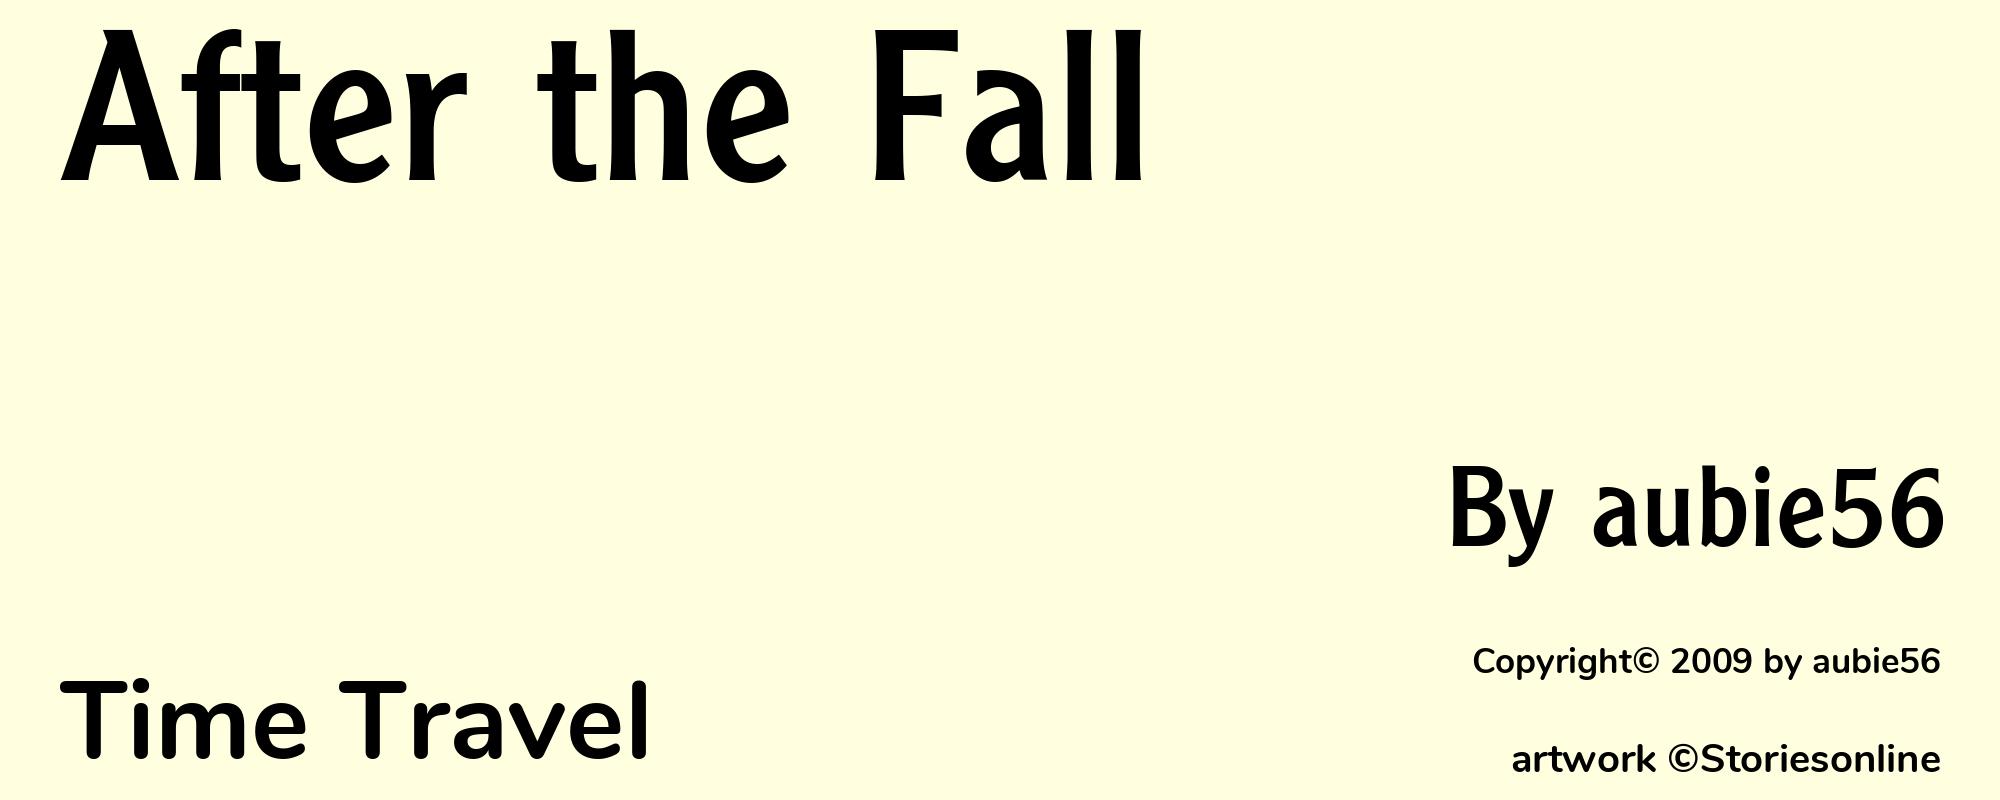 After the Fall - Cover